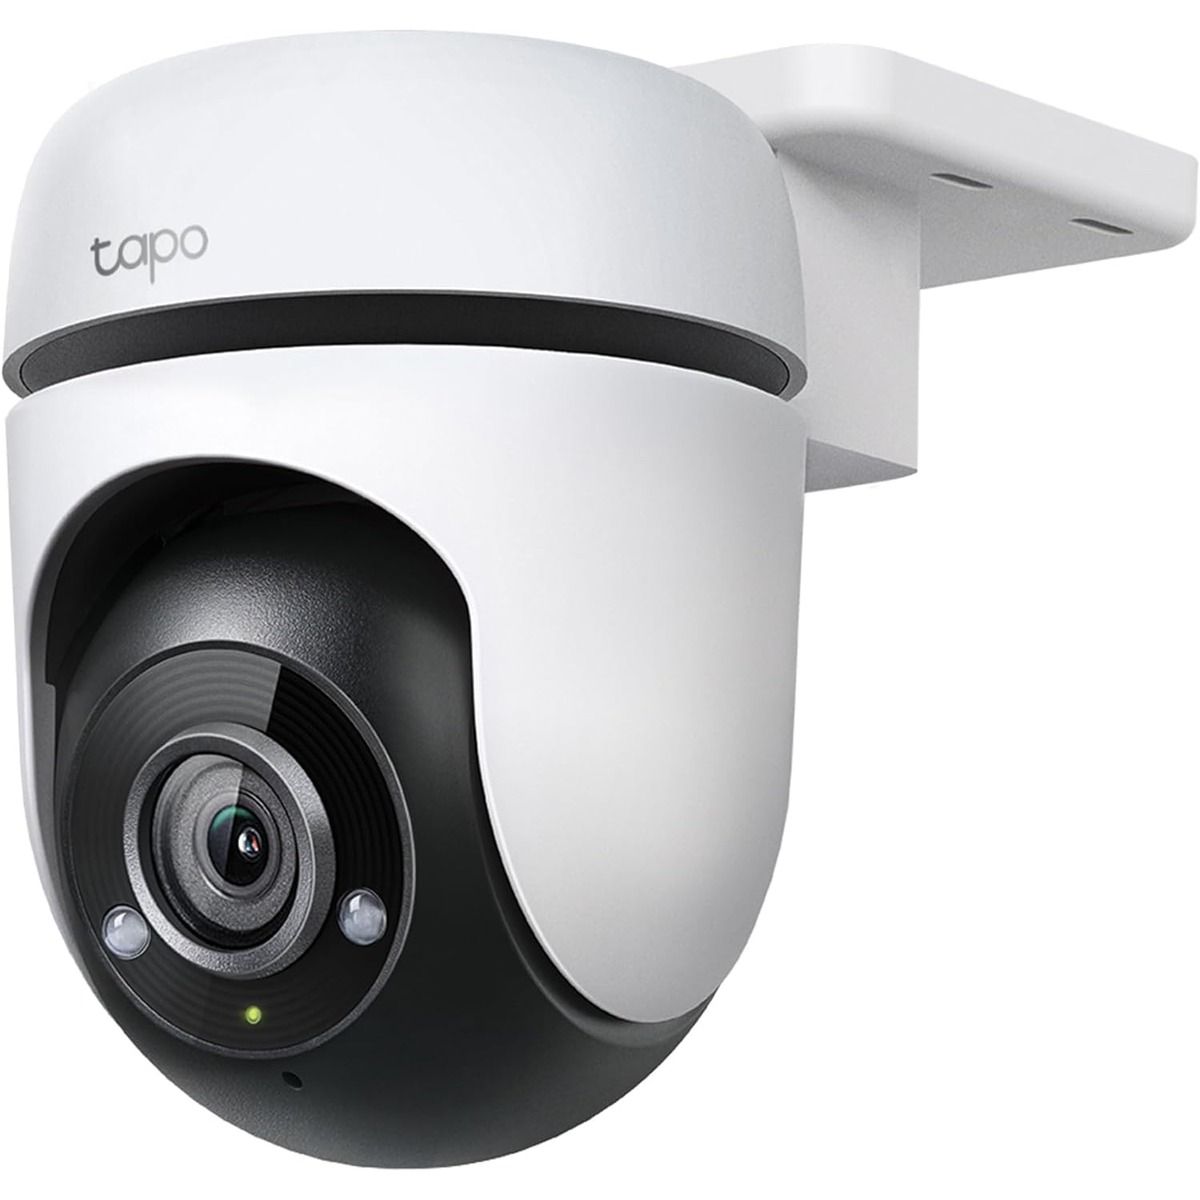 The TP-Link Tapo C500 outdoor security camera against a white background